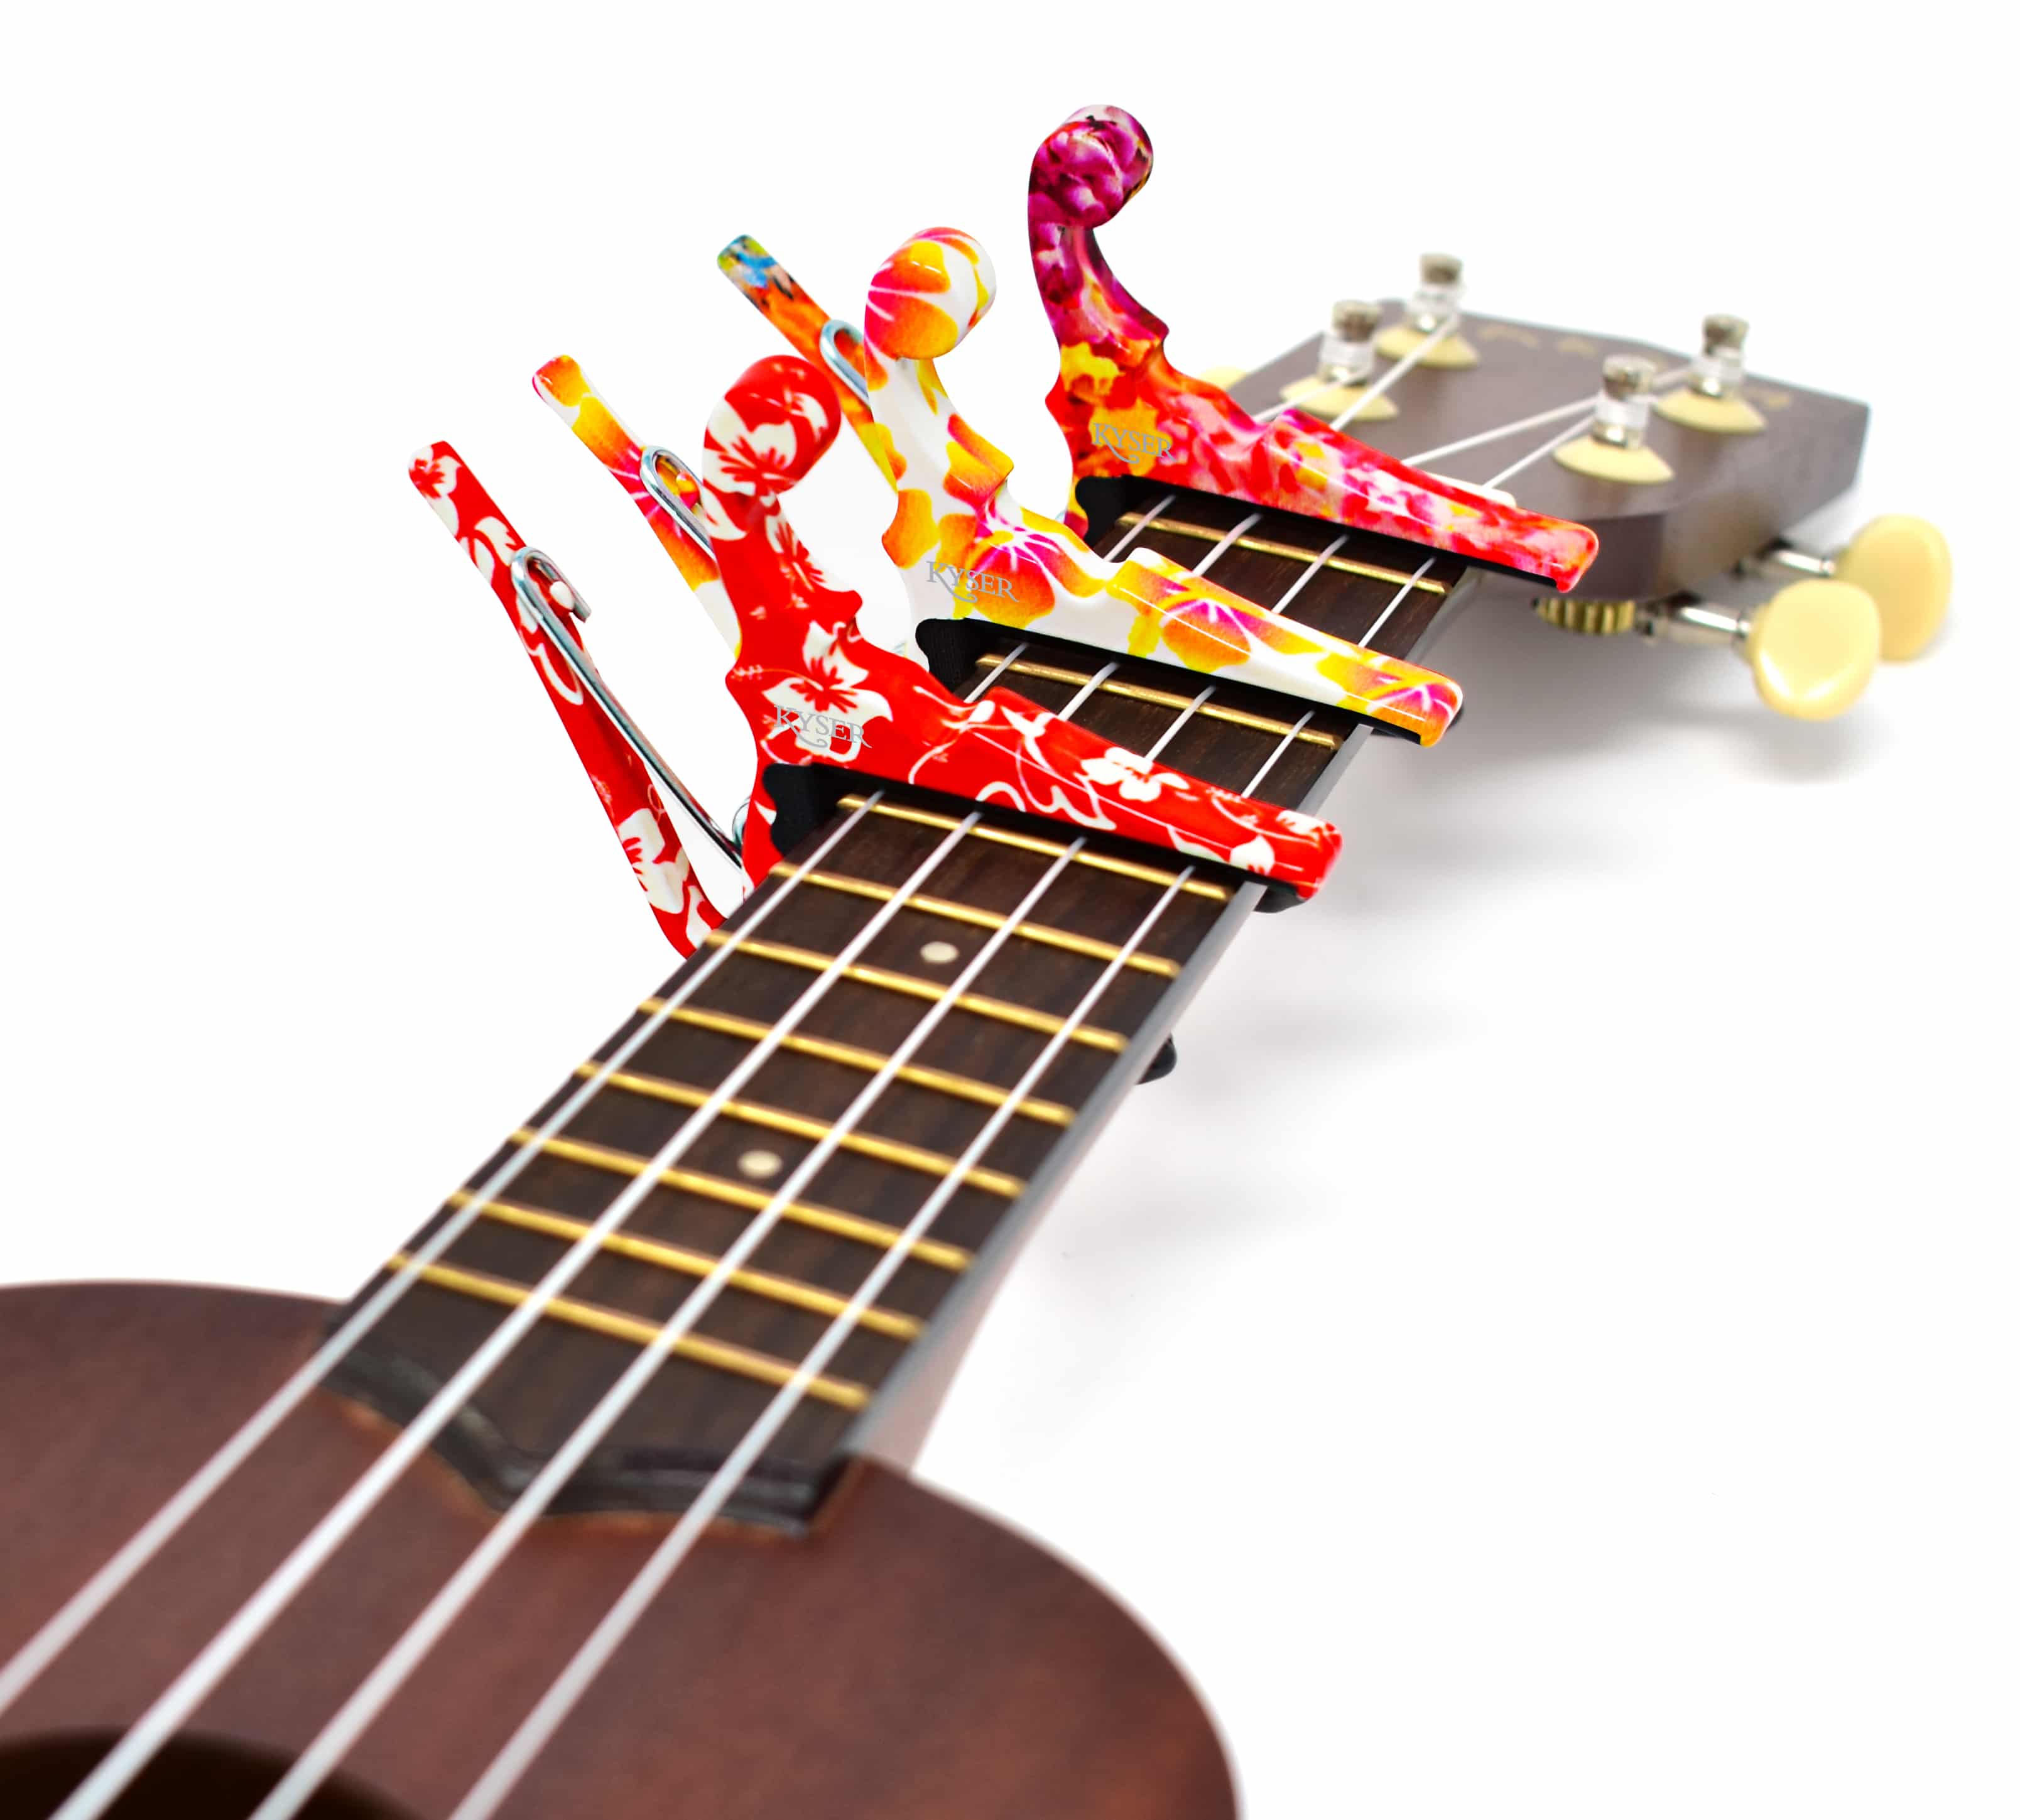 Kyser® Musical Products launches Hawaiian-themed Quick-Change capos for ukuleles